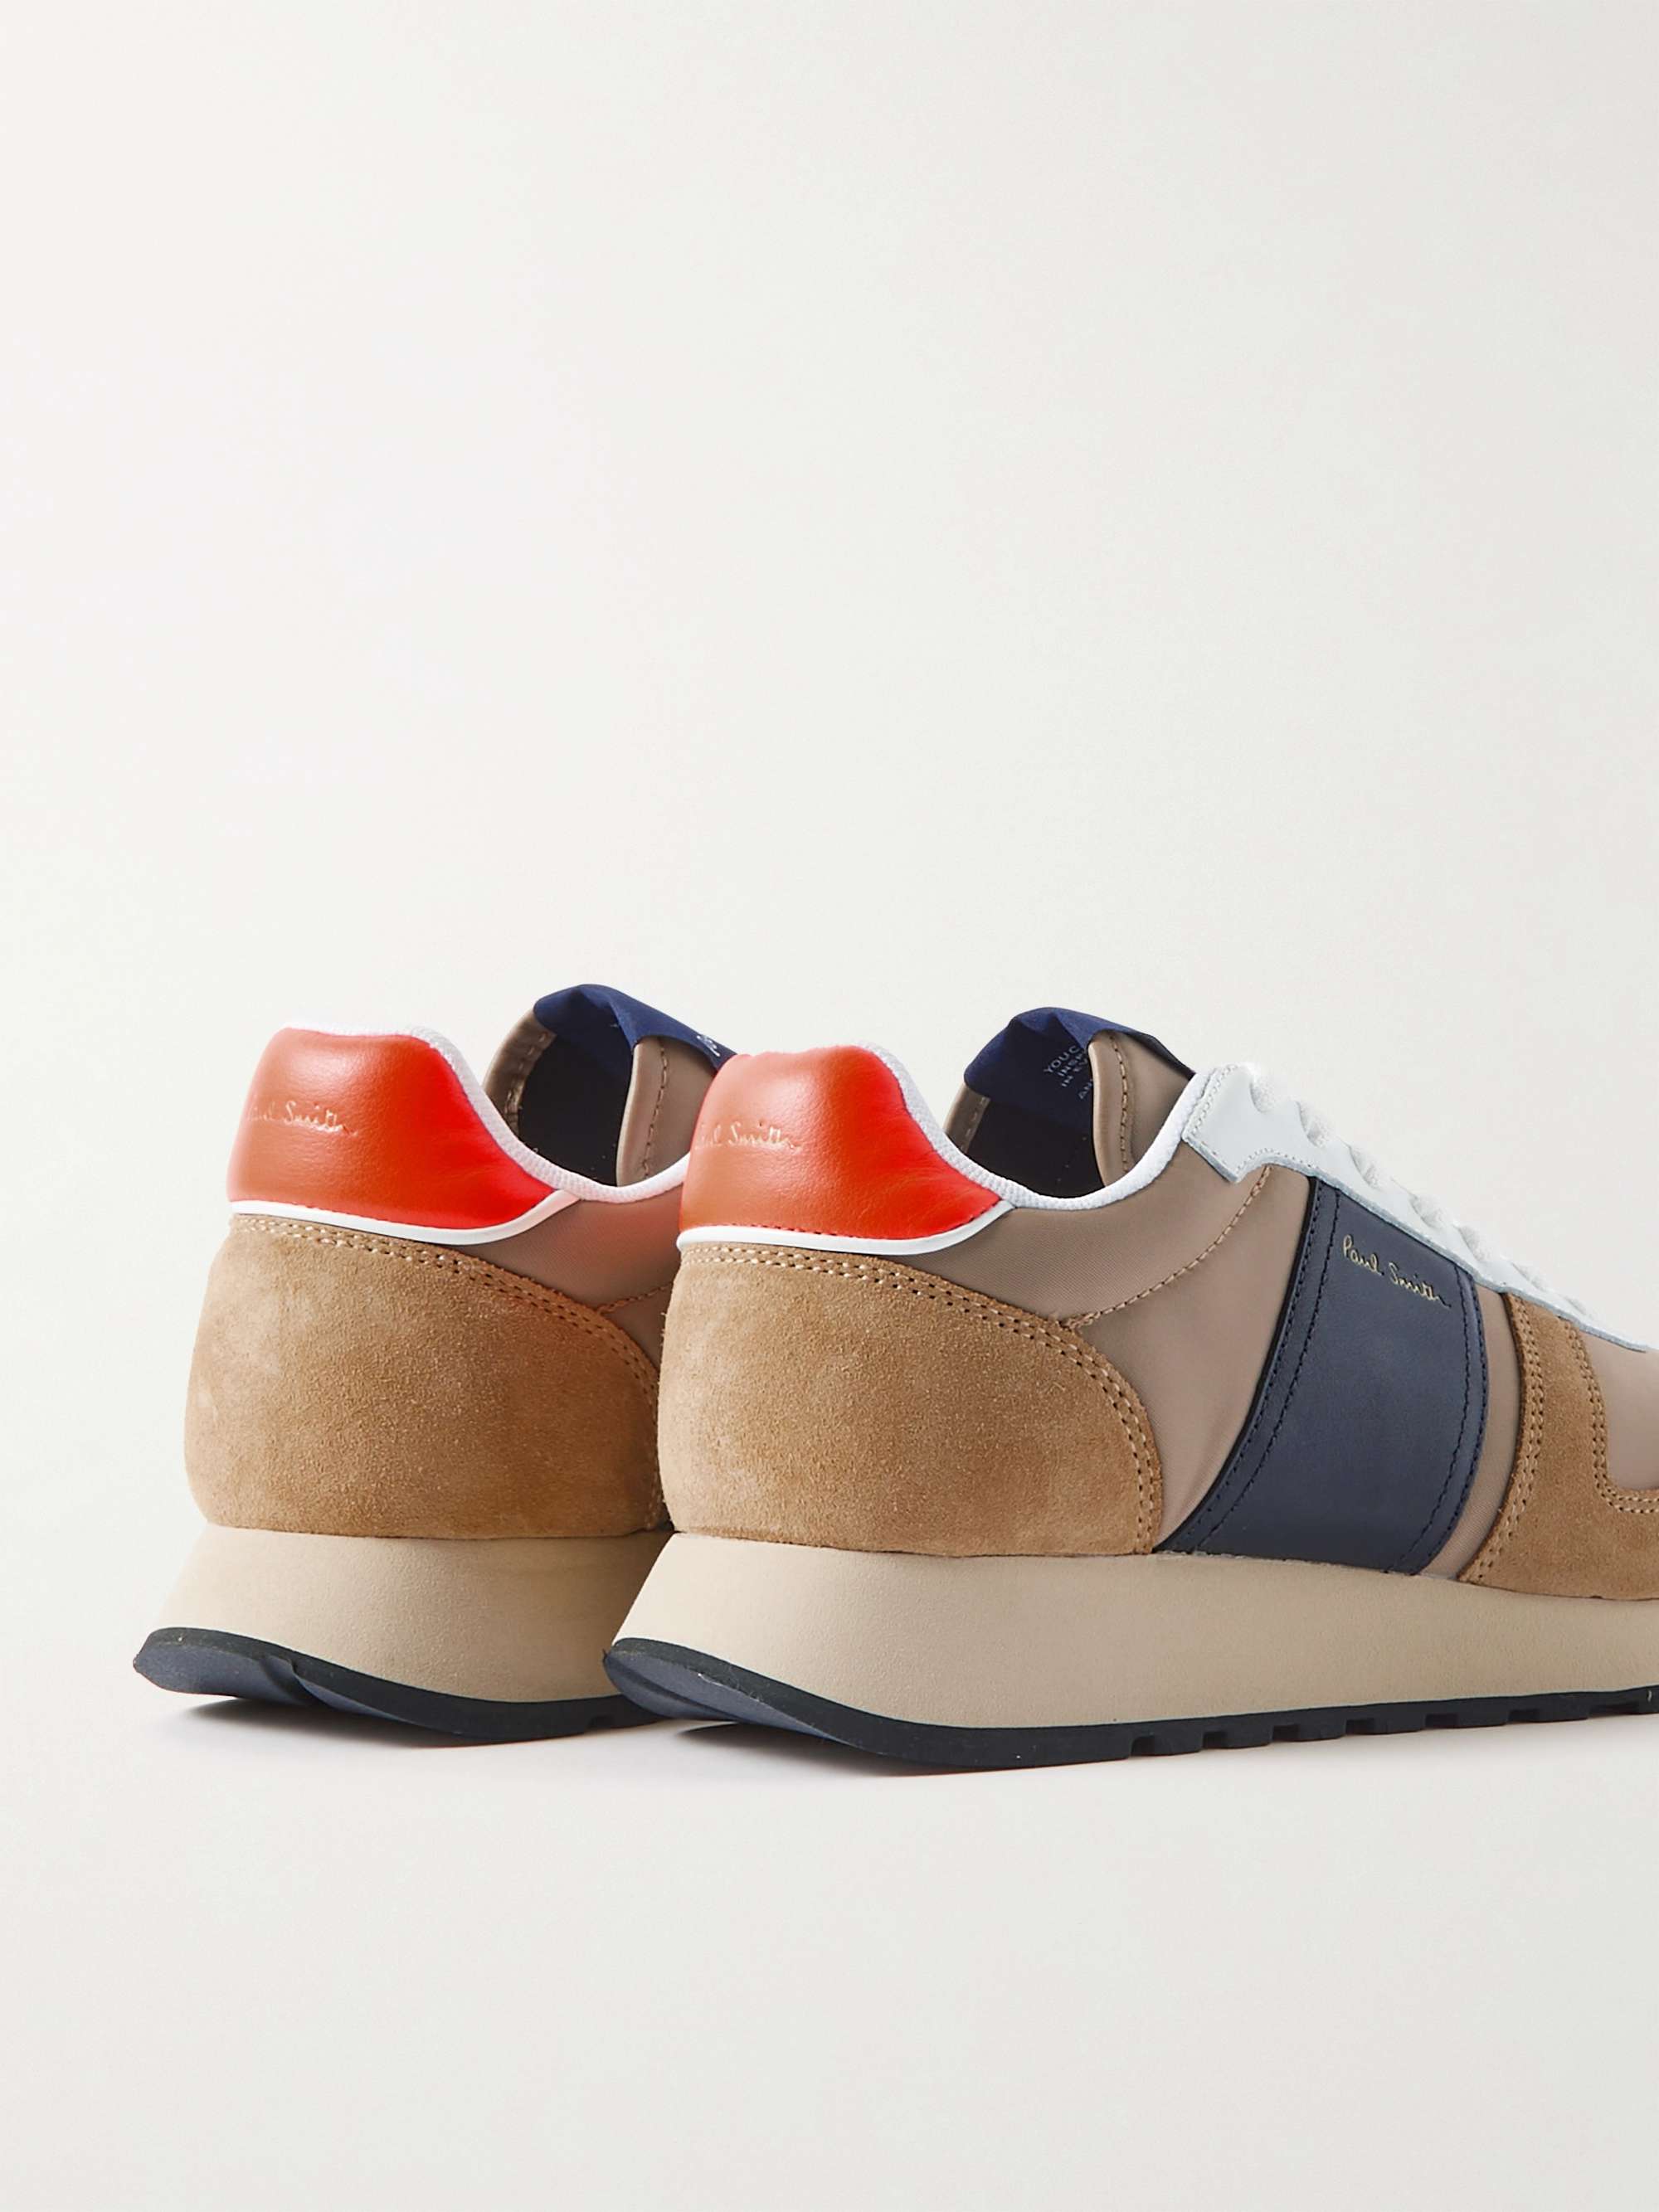 PAUL SMITH Eighties Suede, Leather and Shell Sneakers